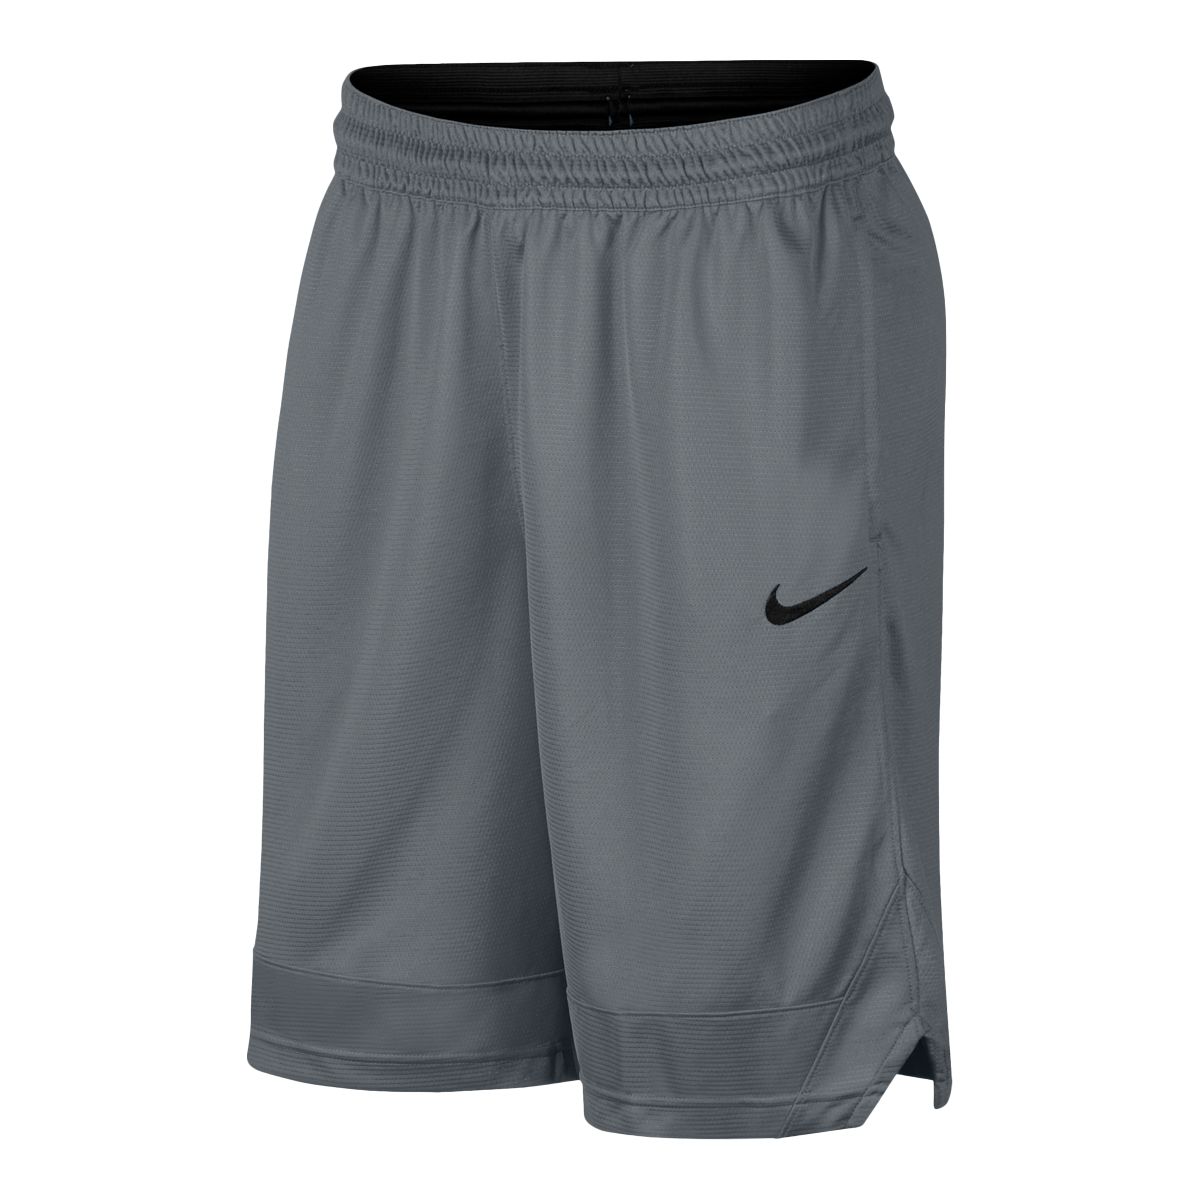 Under Armour Men's Baseline 10-in Basketball Shorts Loose Fit Quick-Dry